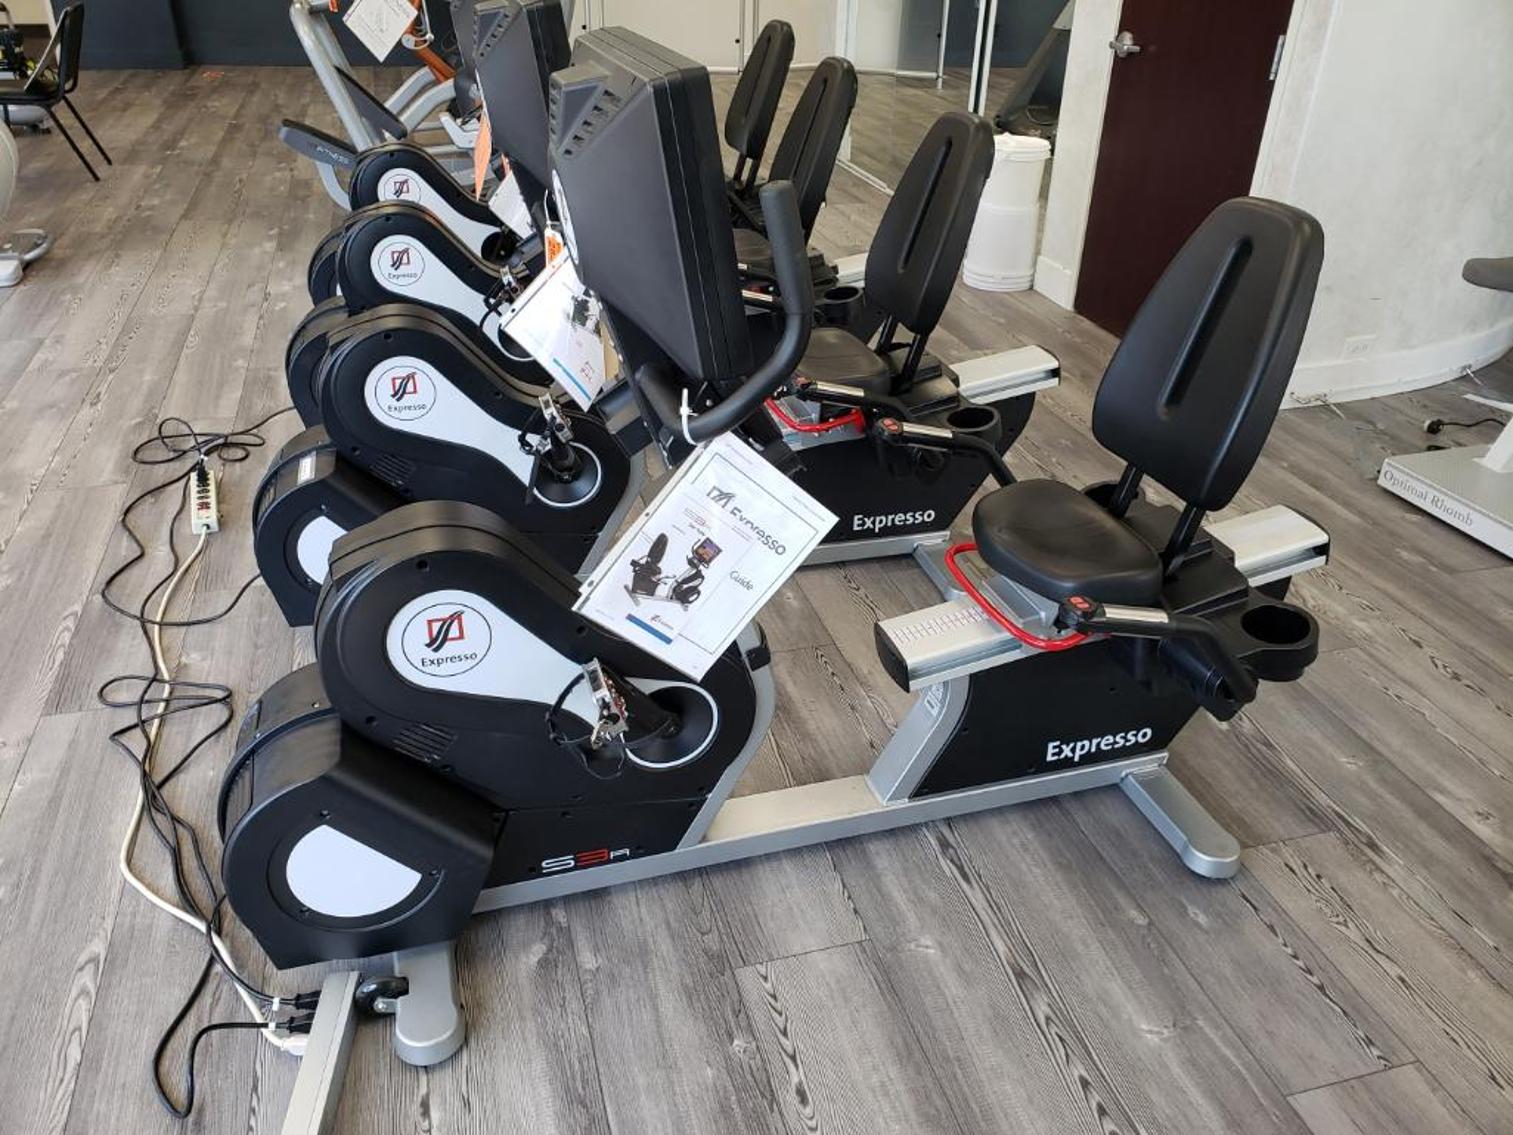 Fitness and Physical Therapy Equipment